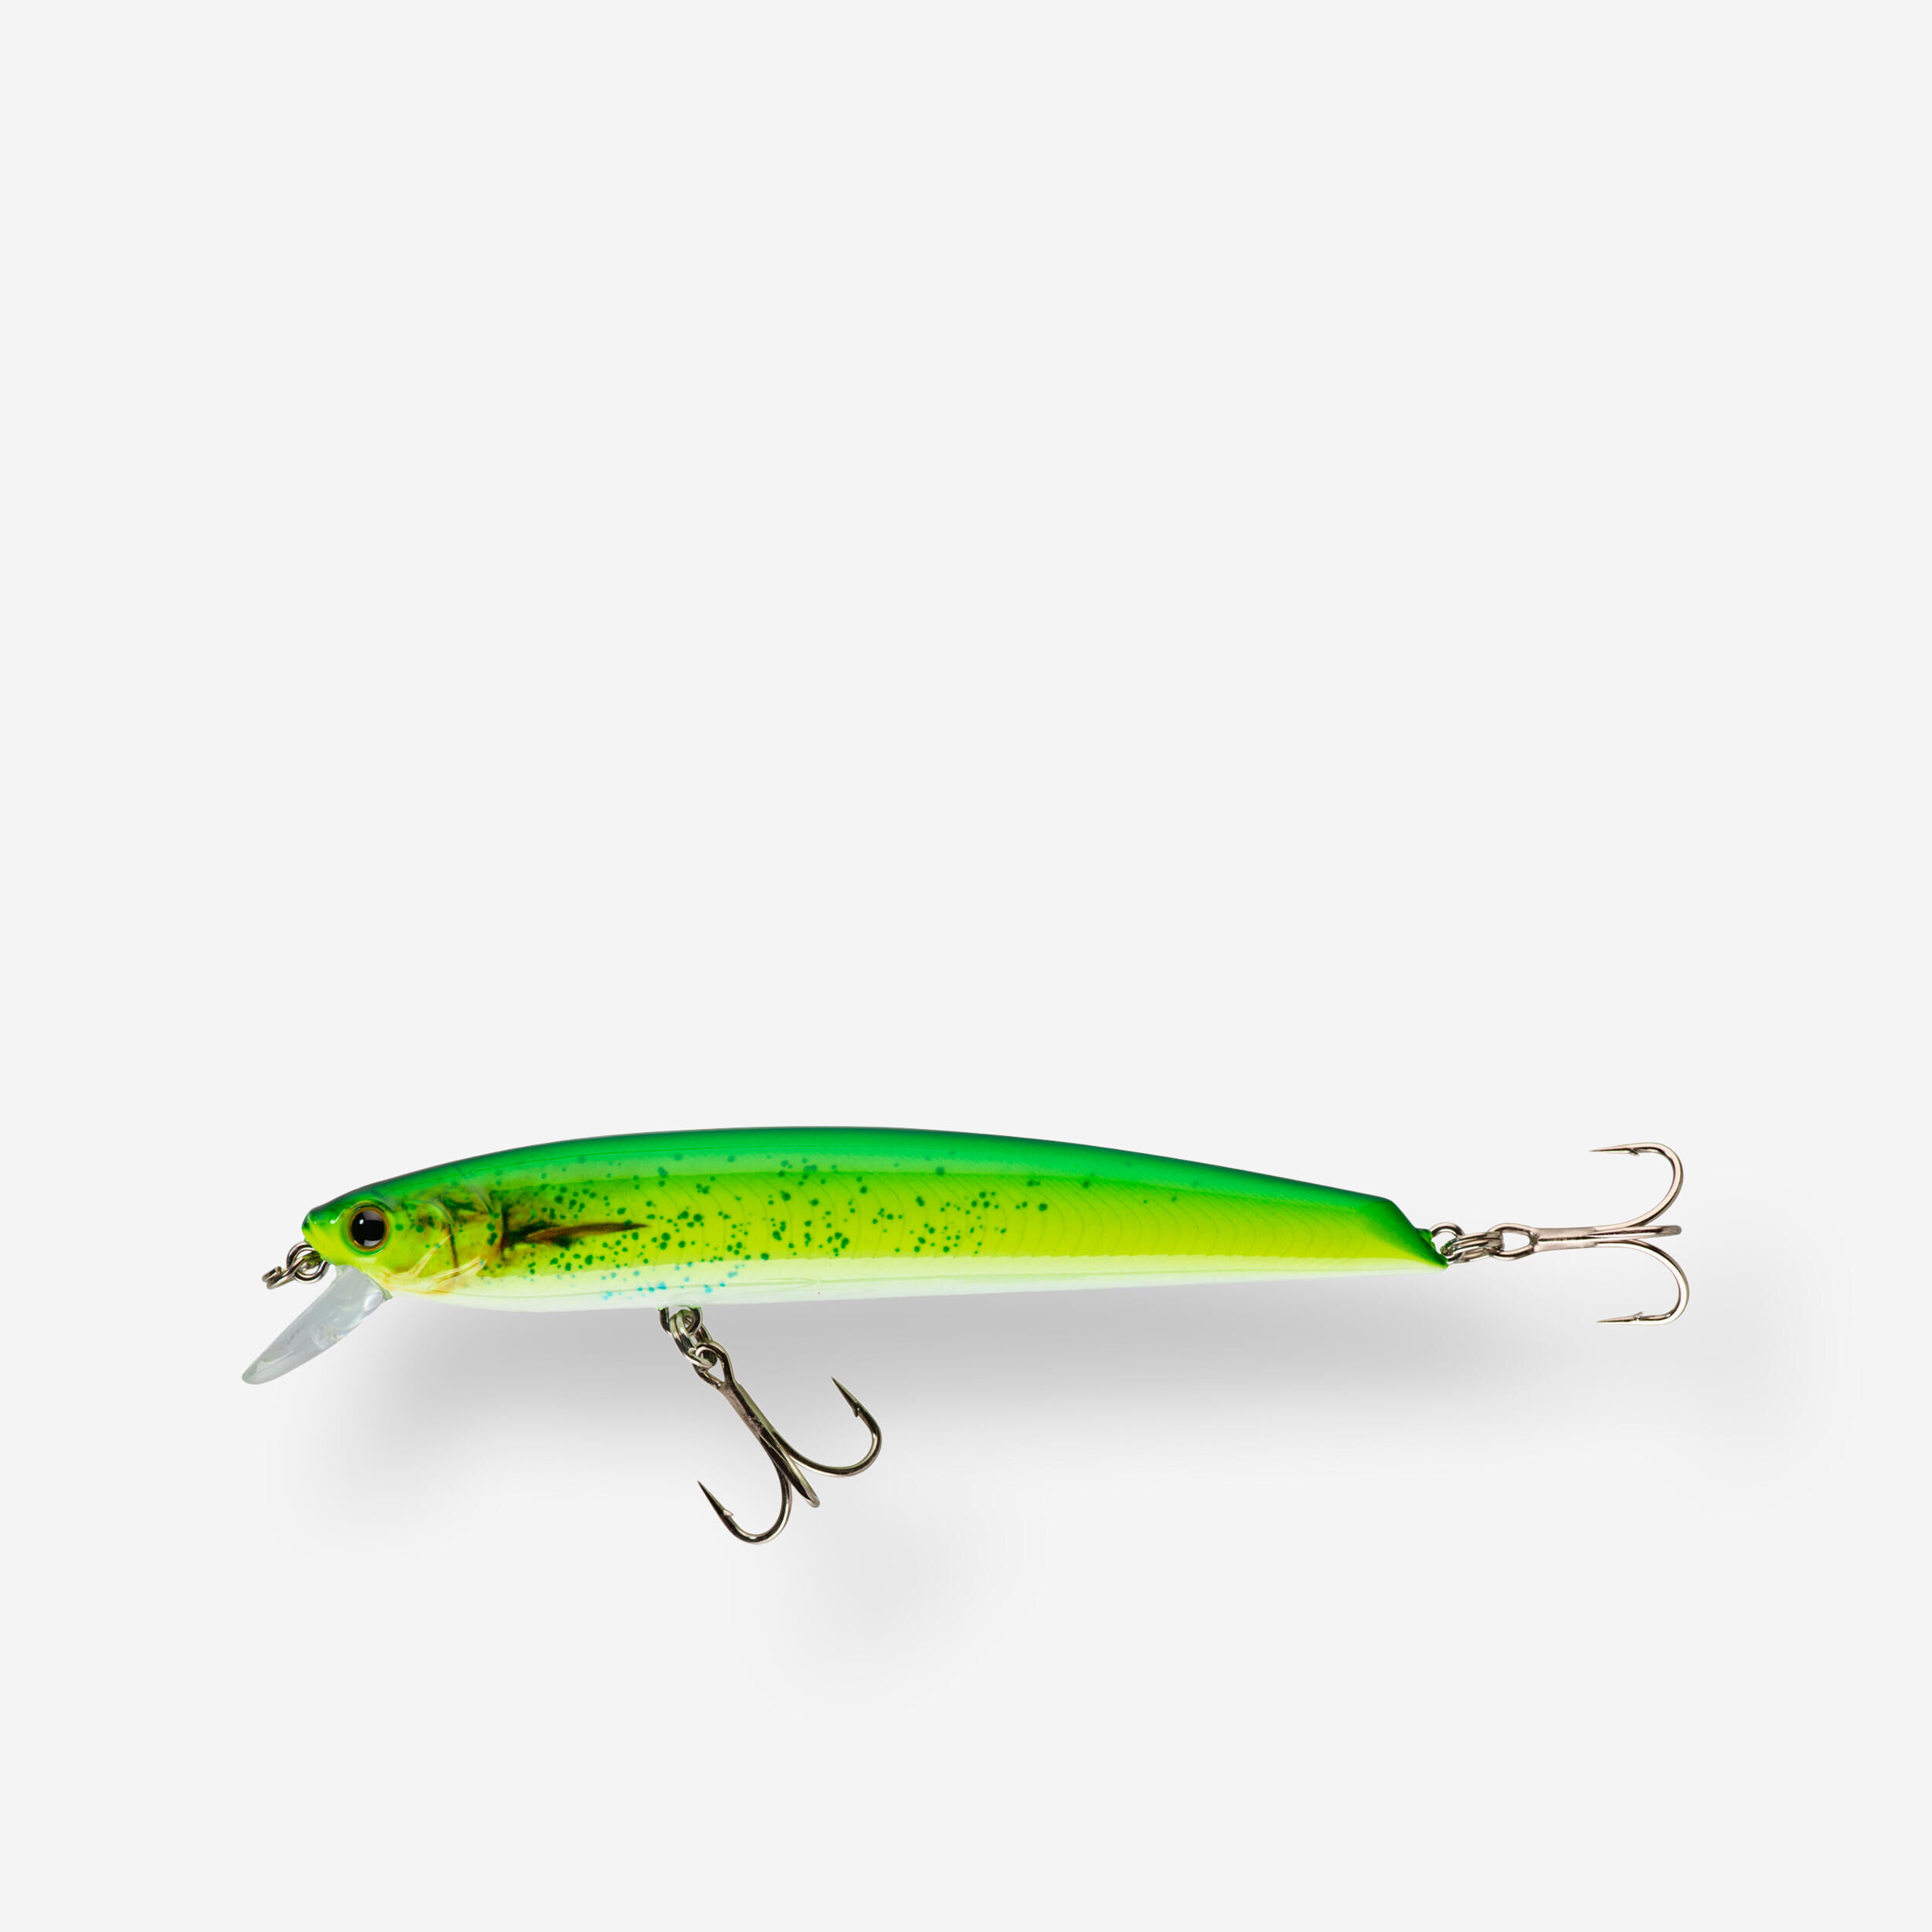 Display Lure Stand TOOL Decoration Fishing Tackle 4.2*3.5*6.5cm